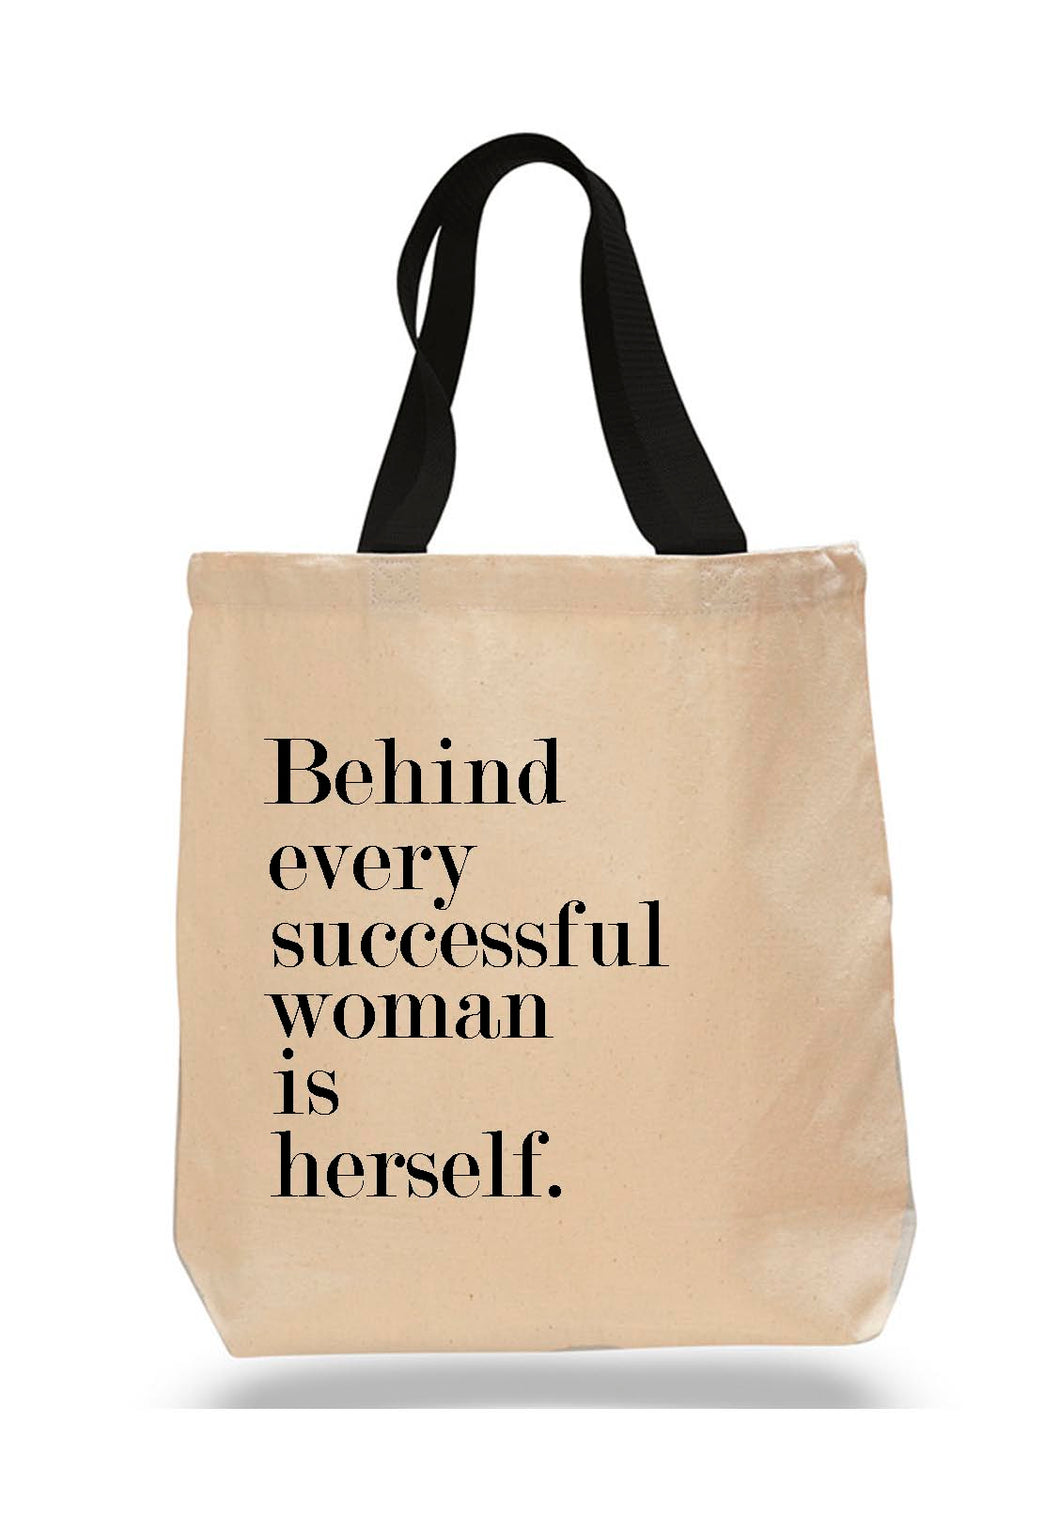 Behind every successful woman is herself. Cotton Canvas Book Bag with Inspirational Quote